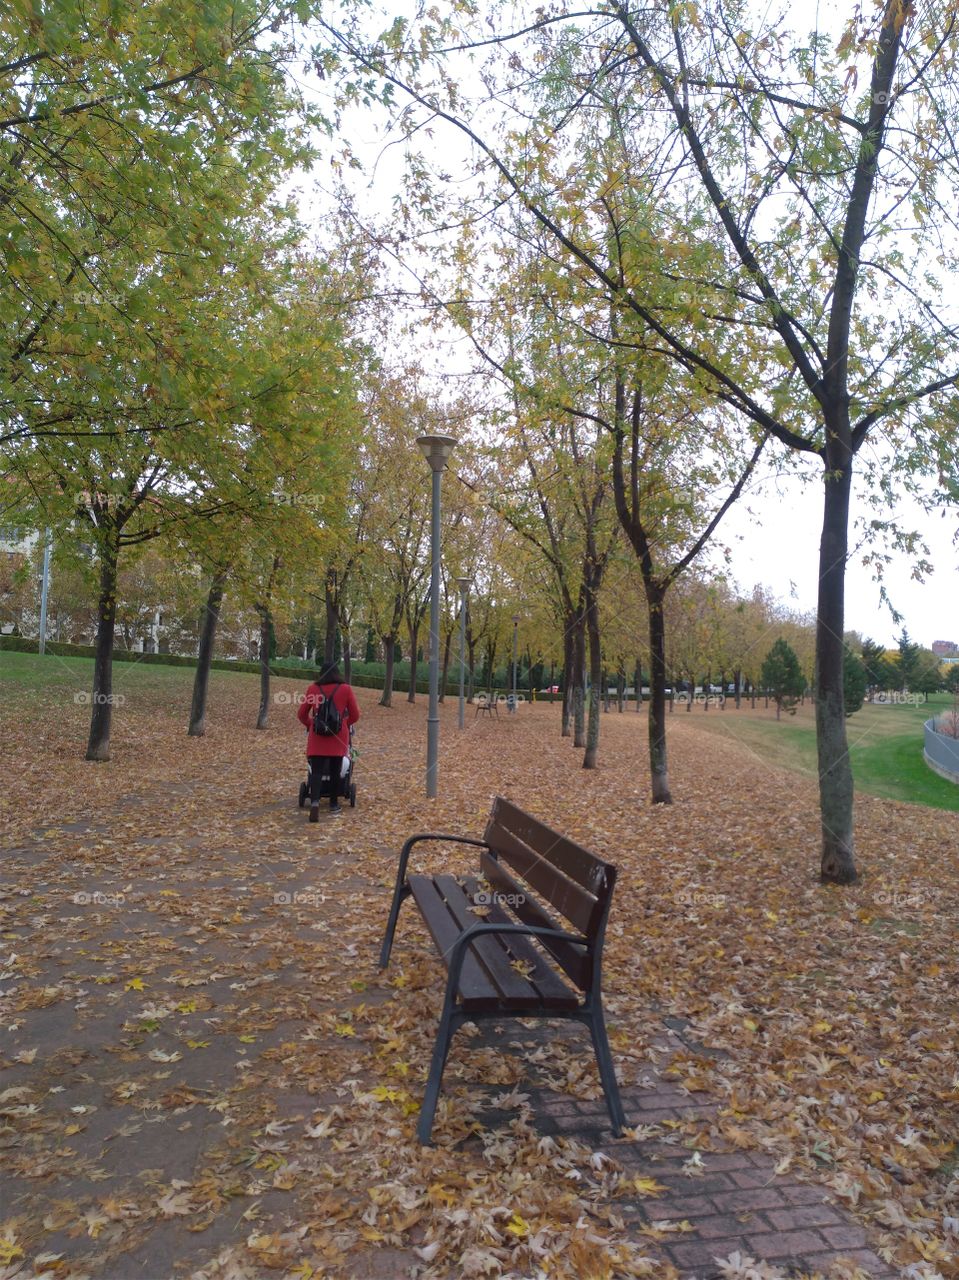 A woman from behind walks with her baby in a car trough the park in autumn